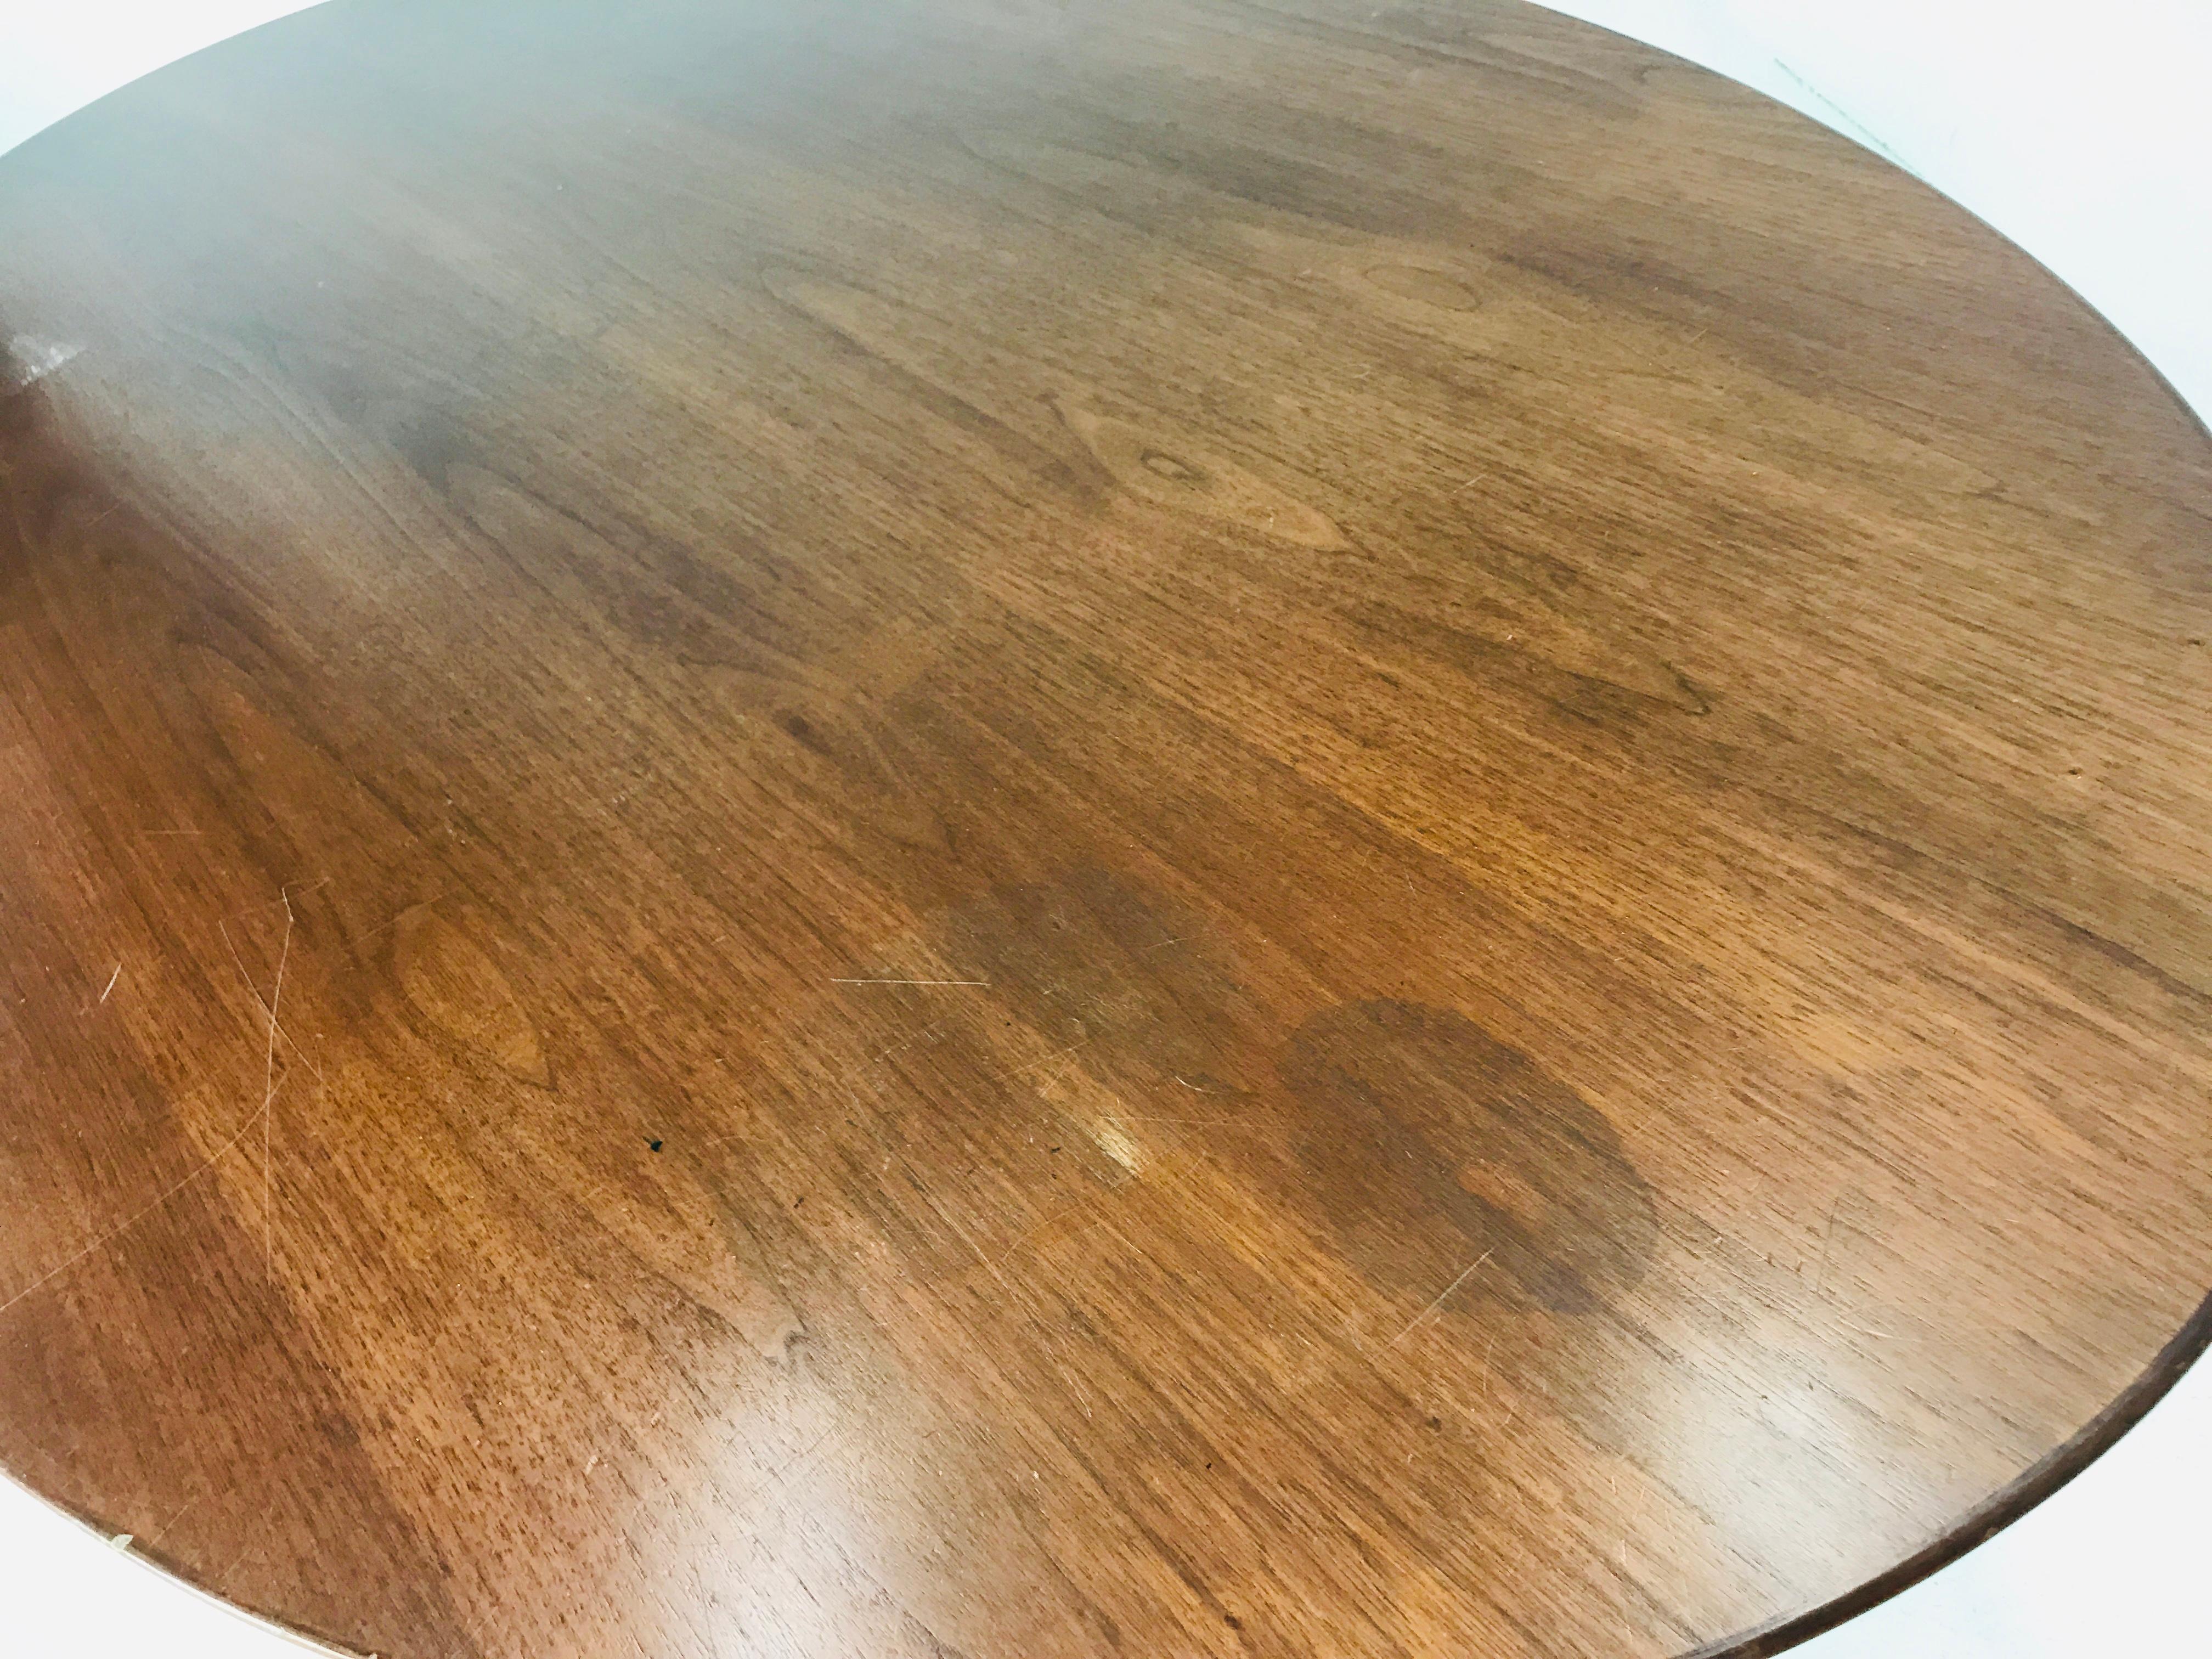 Florence Knoll dining table/desk/conference table.
Top is walnut with beveled edge.
Restoration recommended.